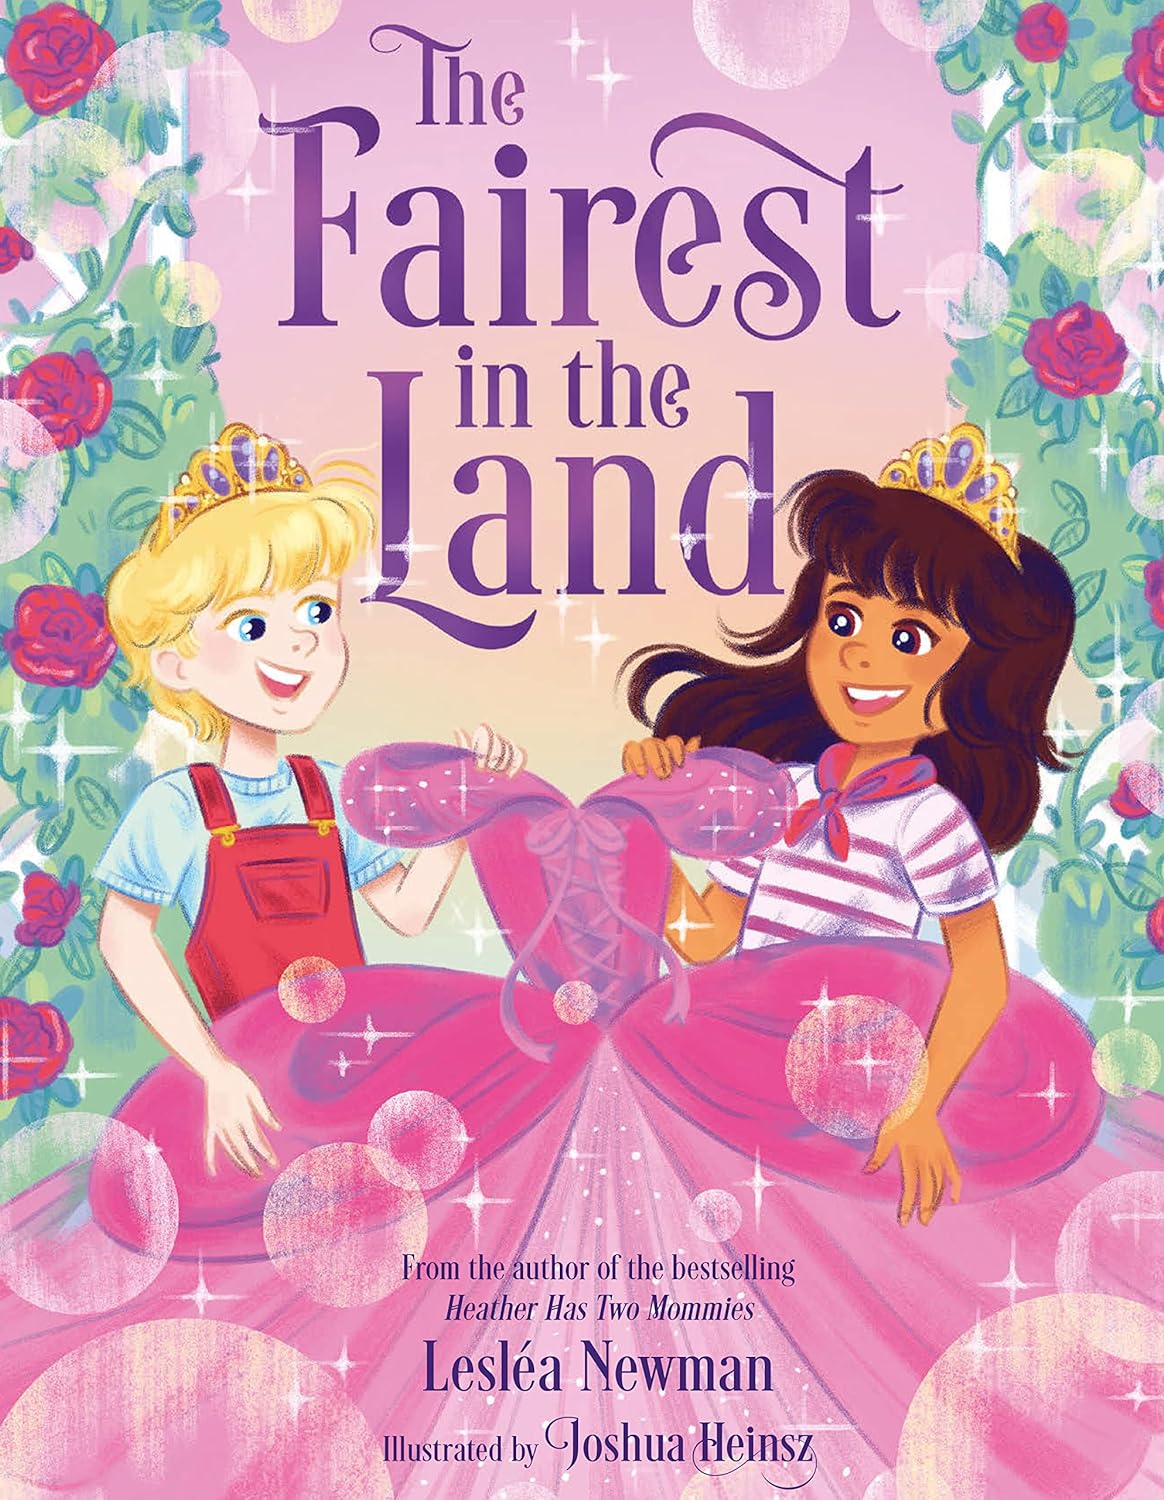 The Fairest in the Land (Hardcover)